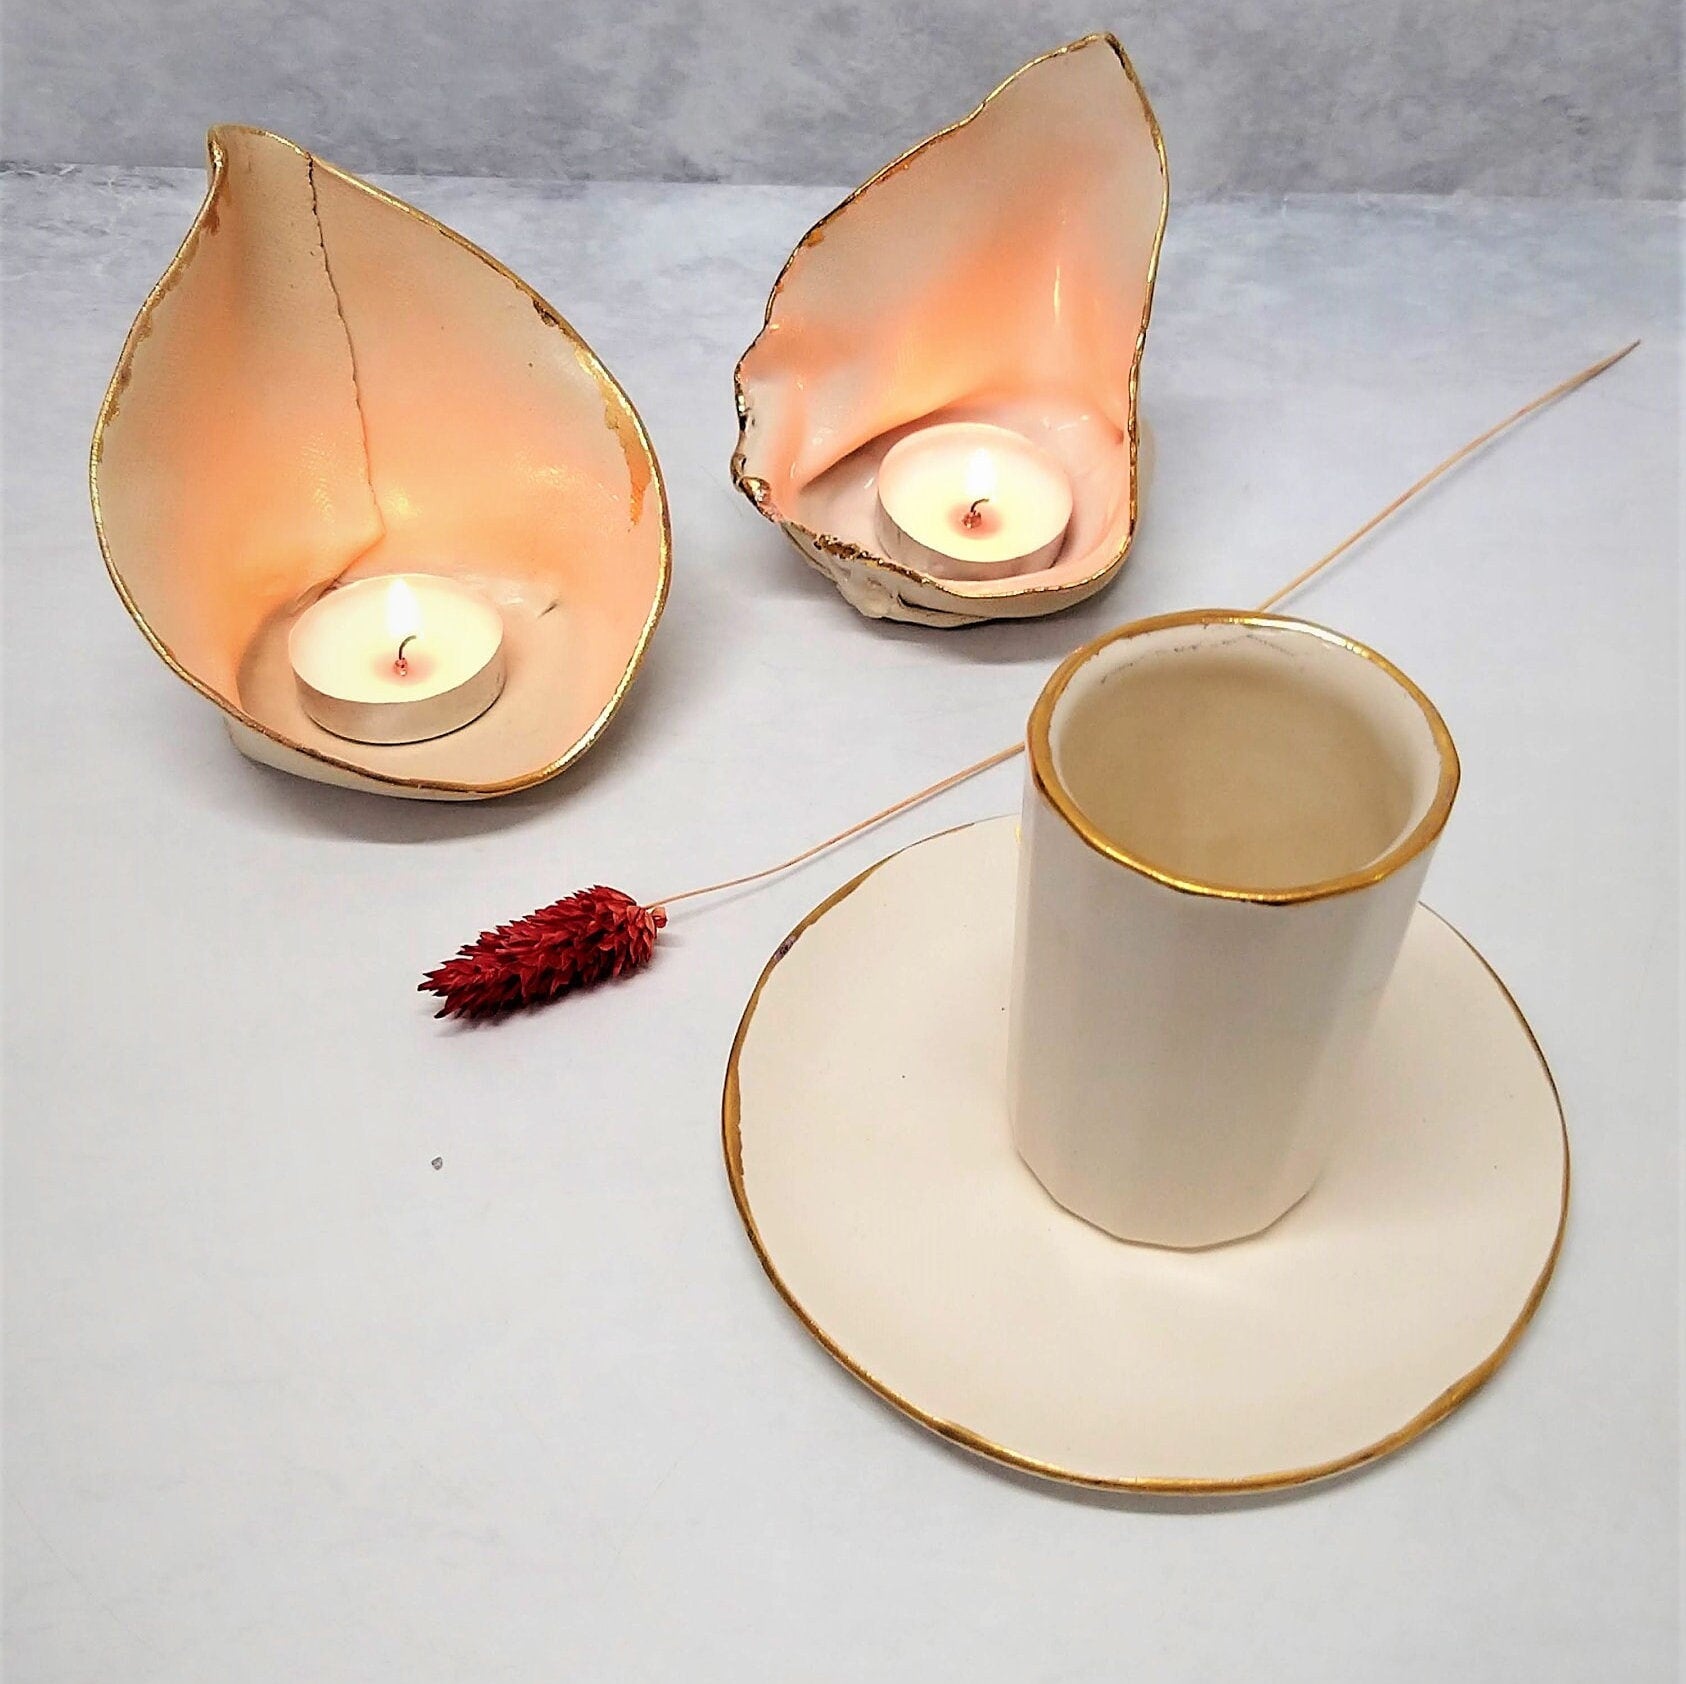 Ceramic candlesticks with cup for kiddush